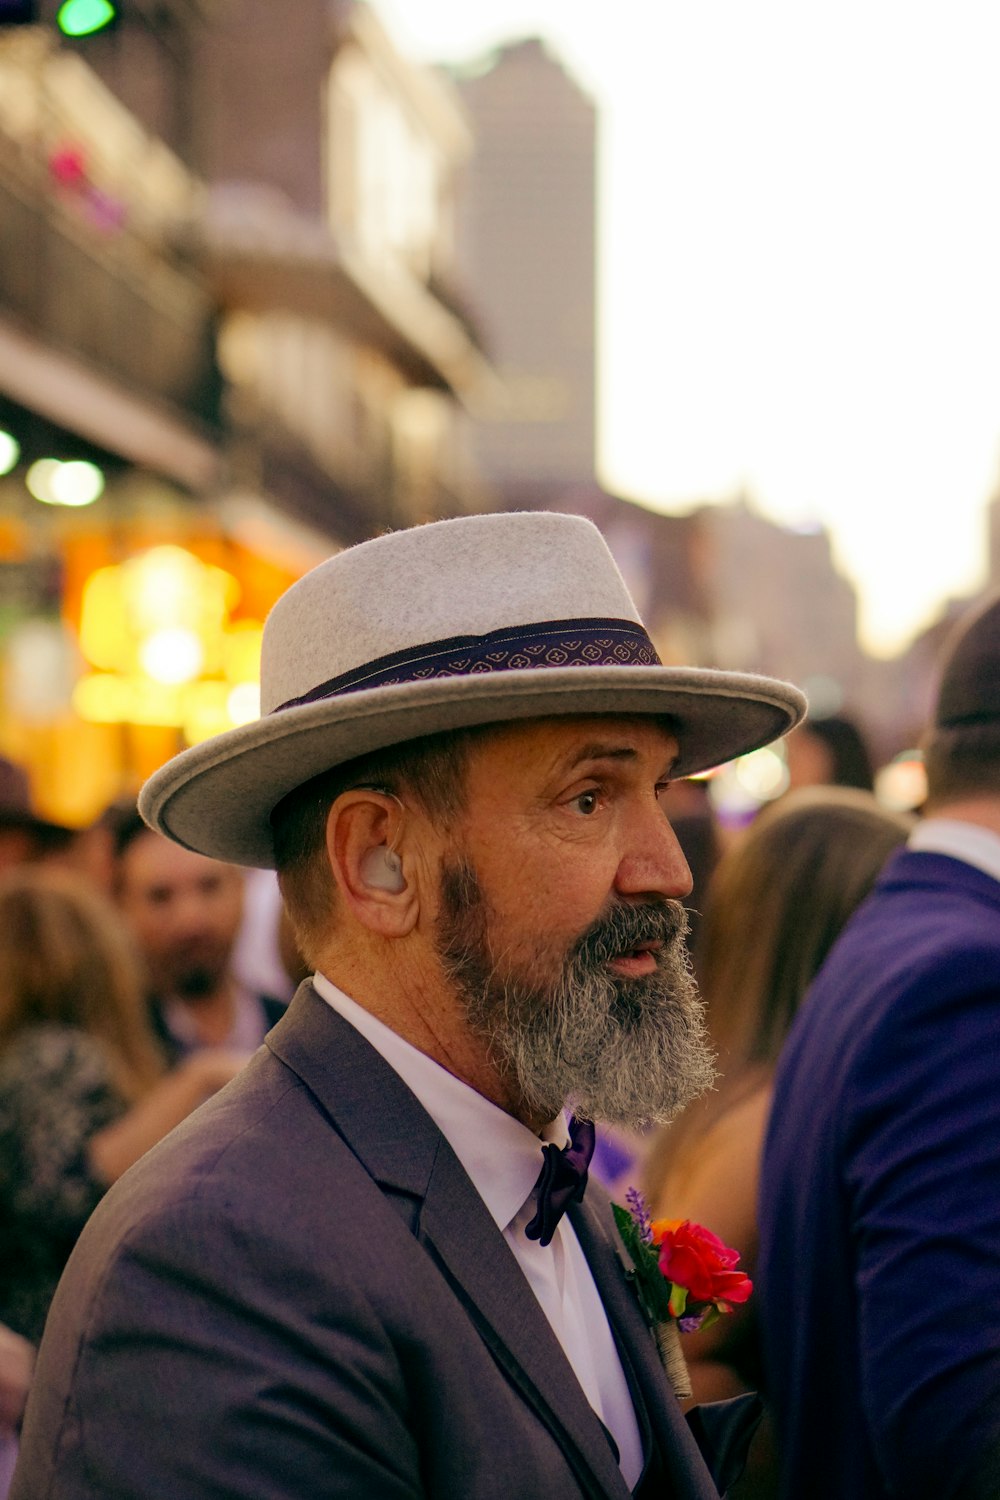 a man with a beard wearing a suit and a hat